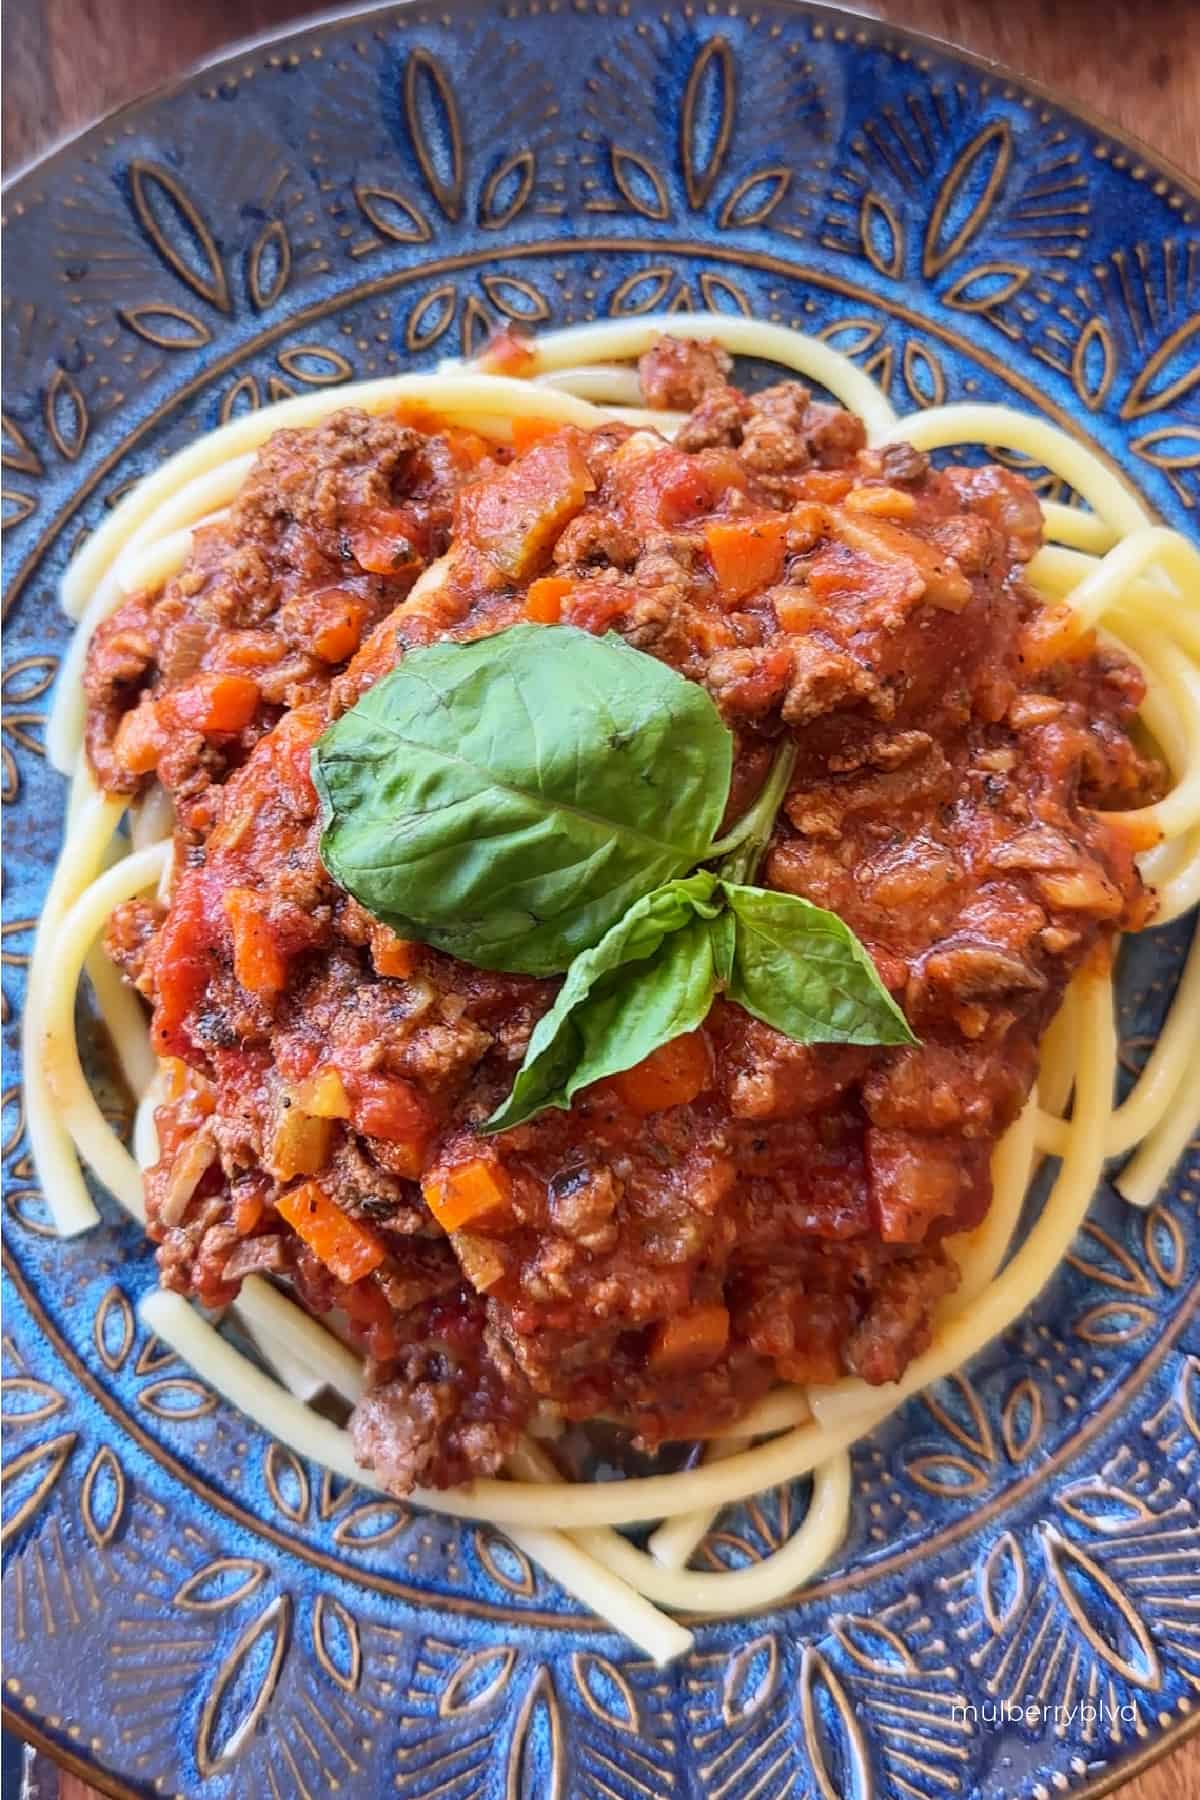 an image of long spaghetti noodles topped with spaghetti sauce on a blue plate